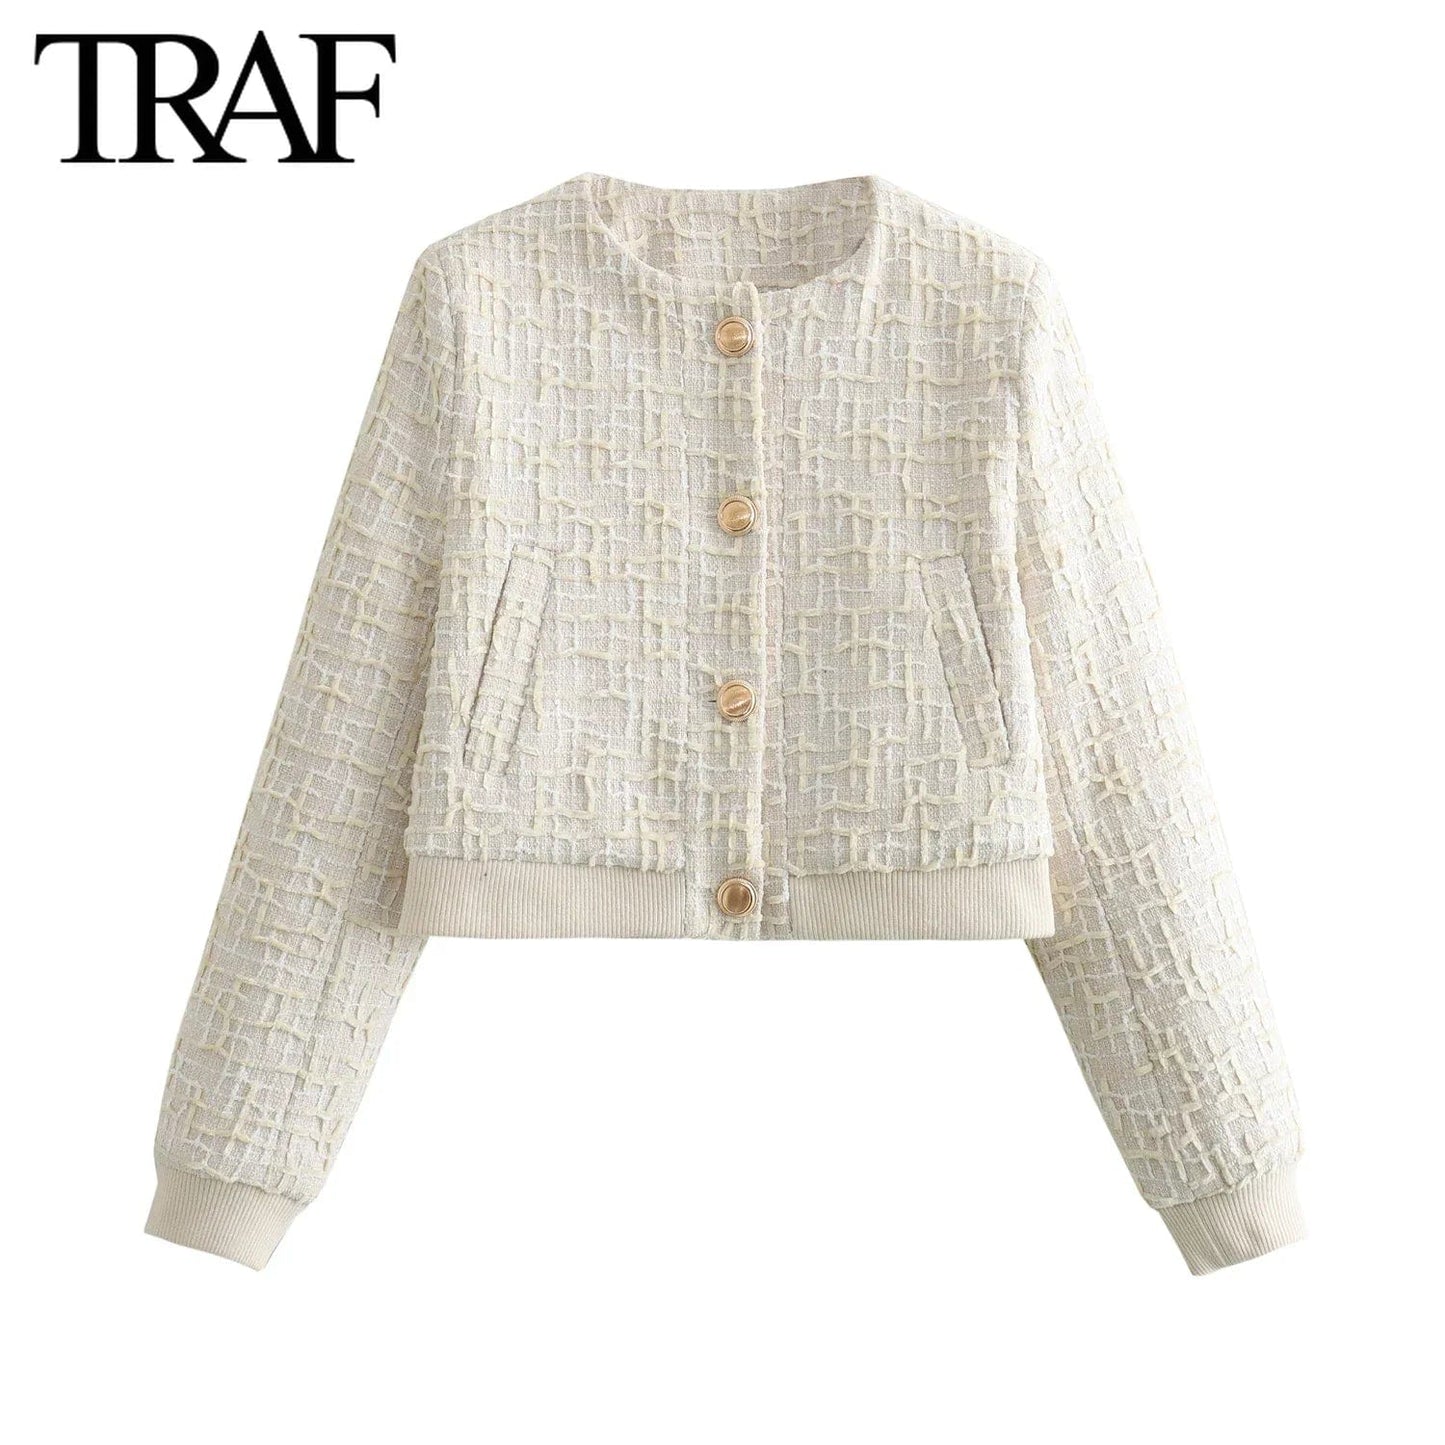 TRAF Women Fashion Spring New Plaid Texture Bomber Jacket Long-sleeved Single-breasted Cardigan Short Coats Chic Female Tops